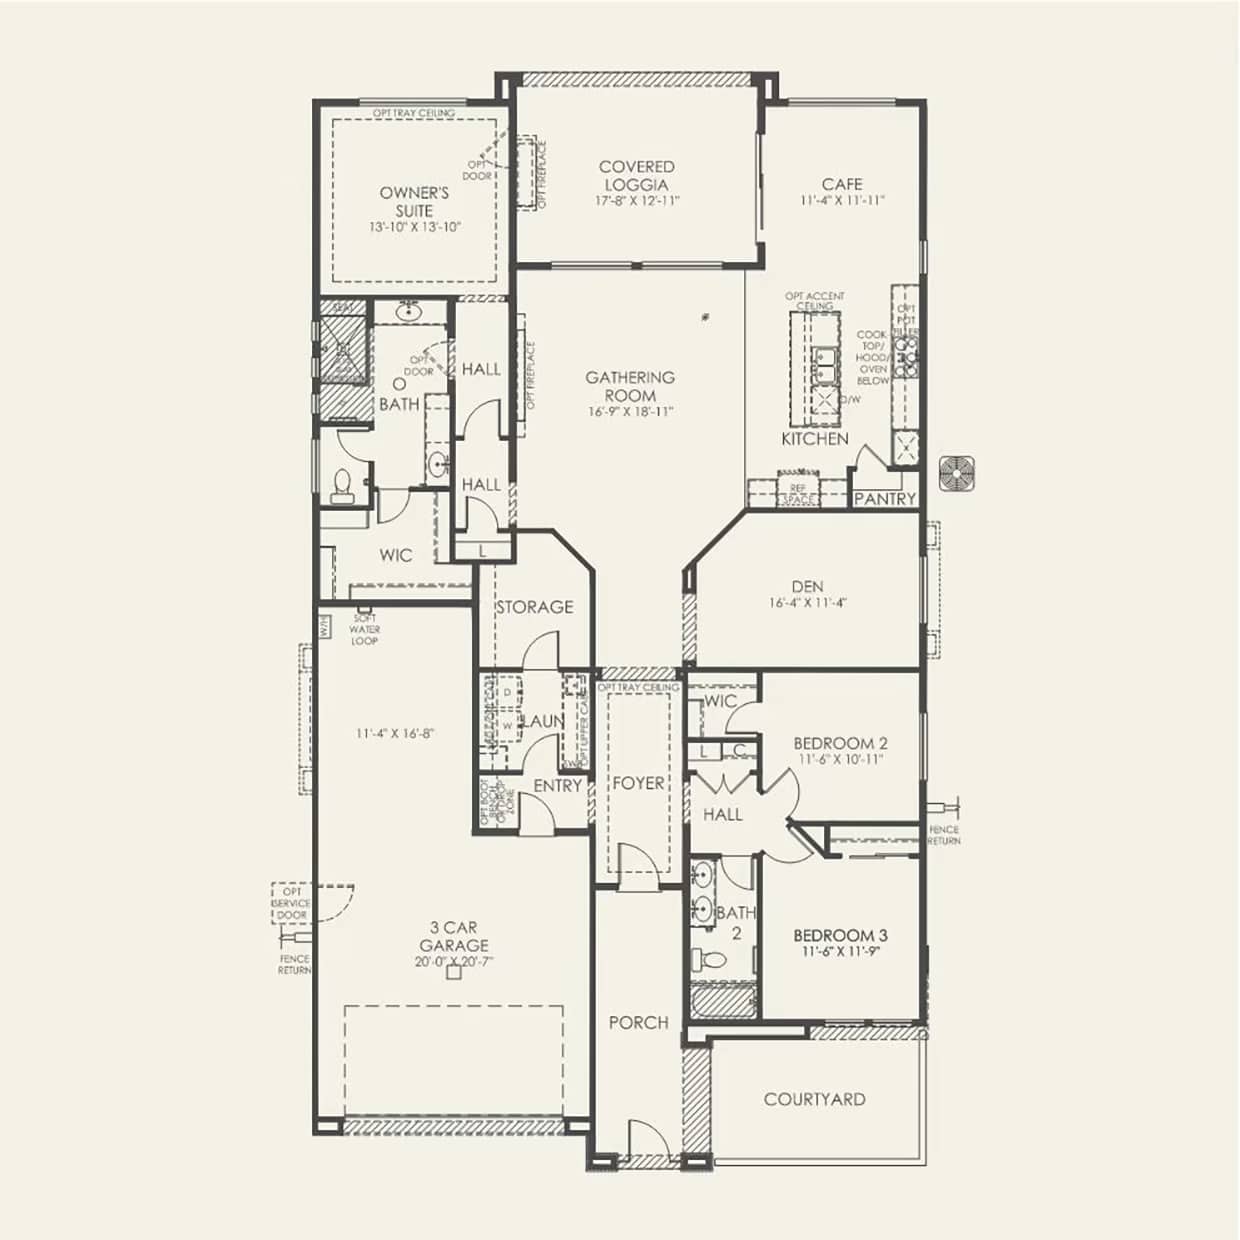 Floorplan of Gardengate Model at Ascension by Pulte Homes